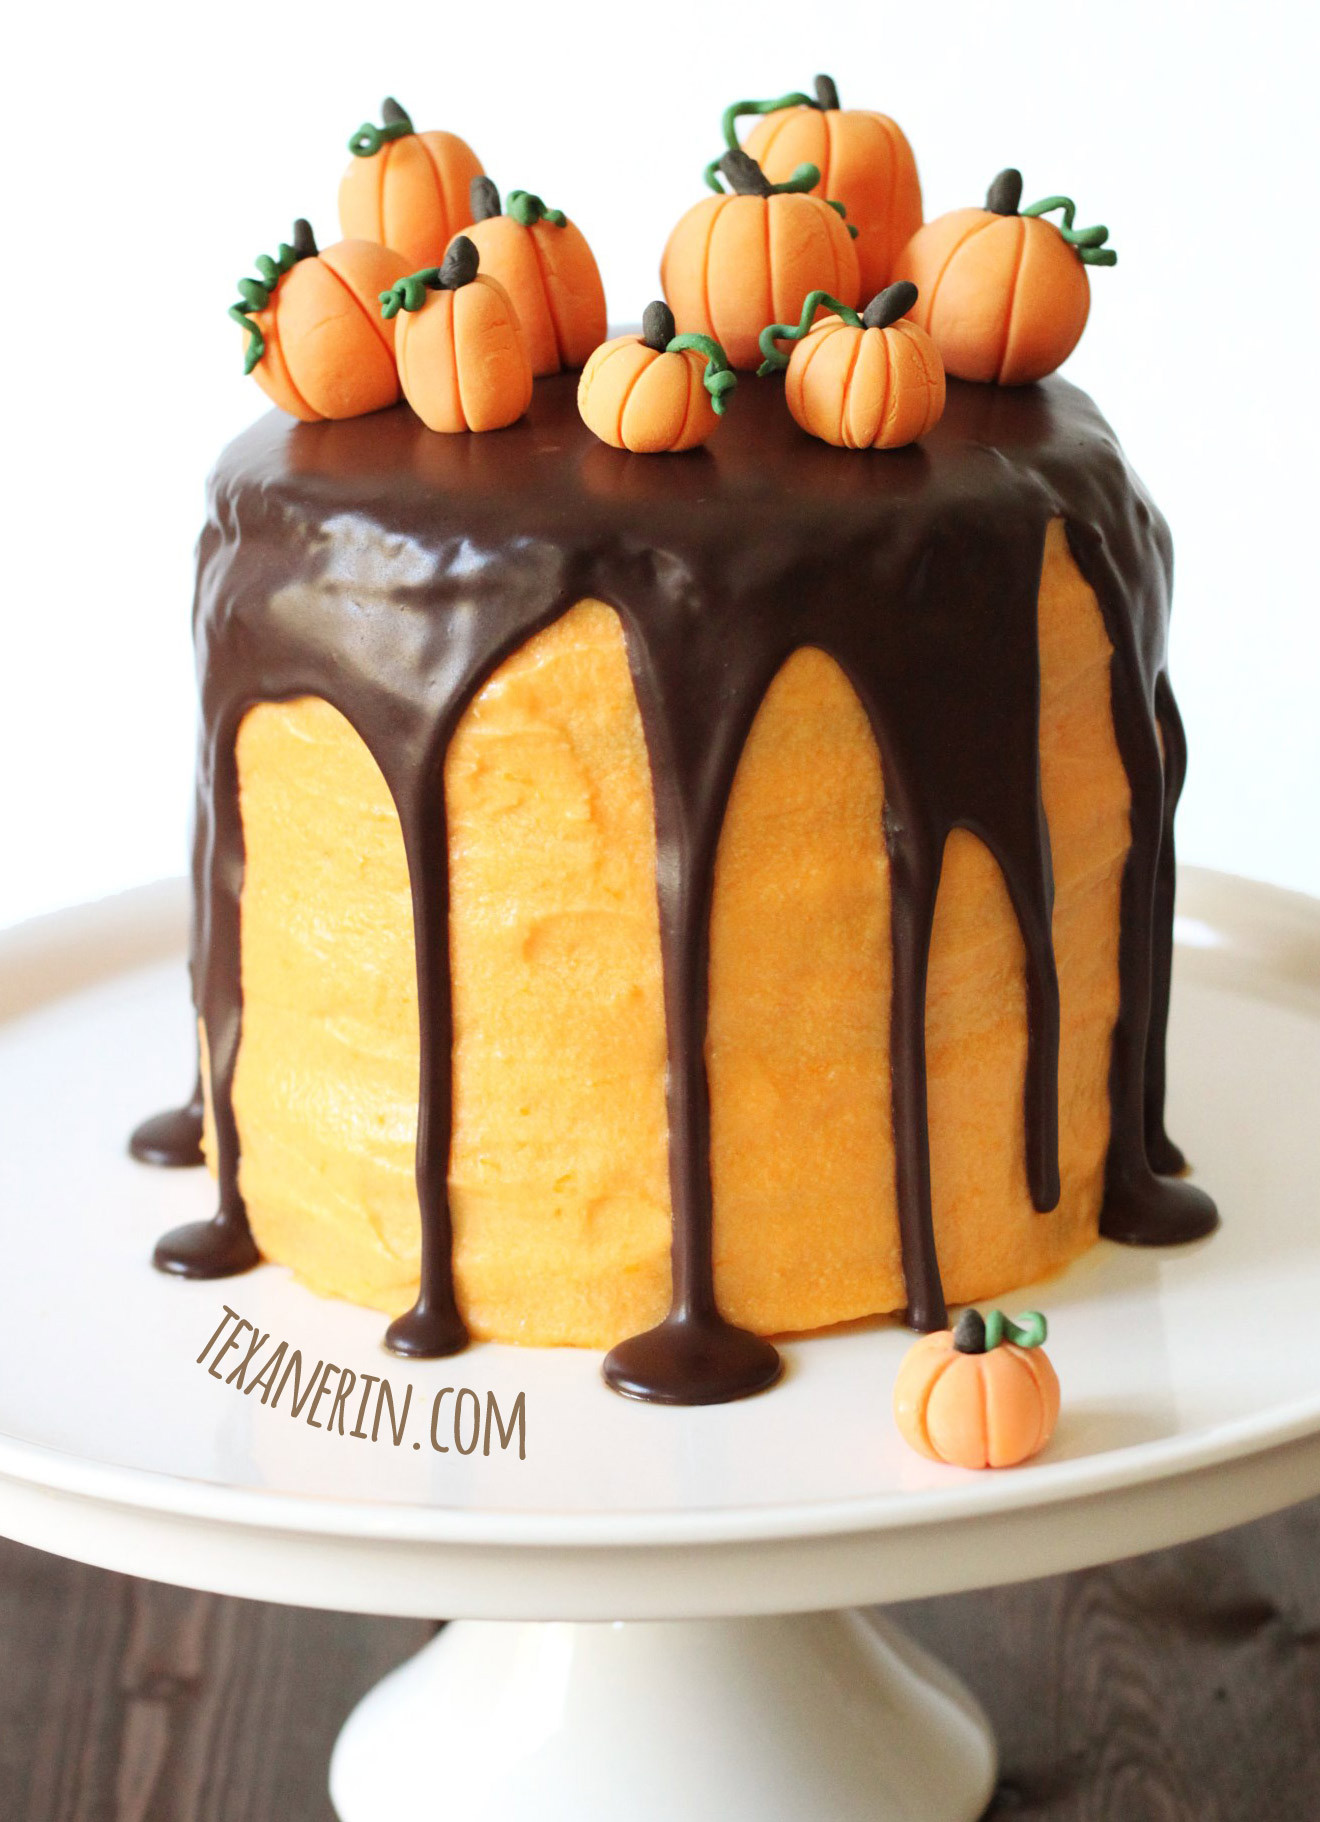 Halloween Cakes Recipes With Pictures
 Chocolate Orange Halloween Cake whole grain